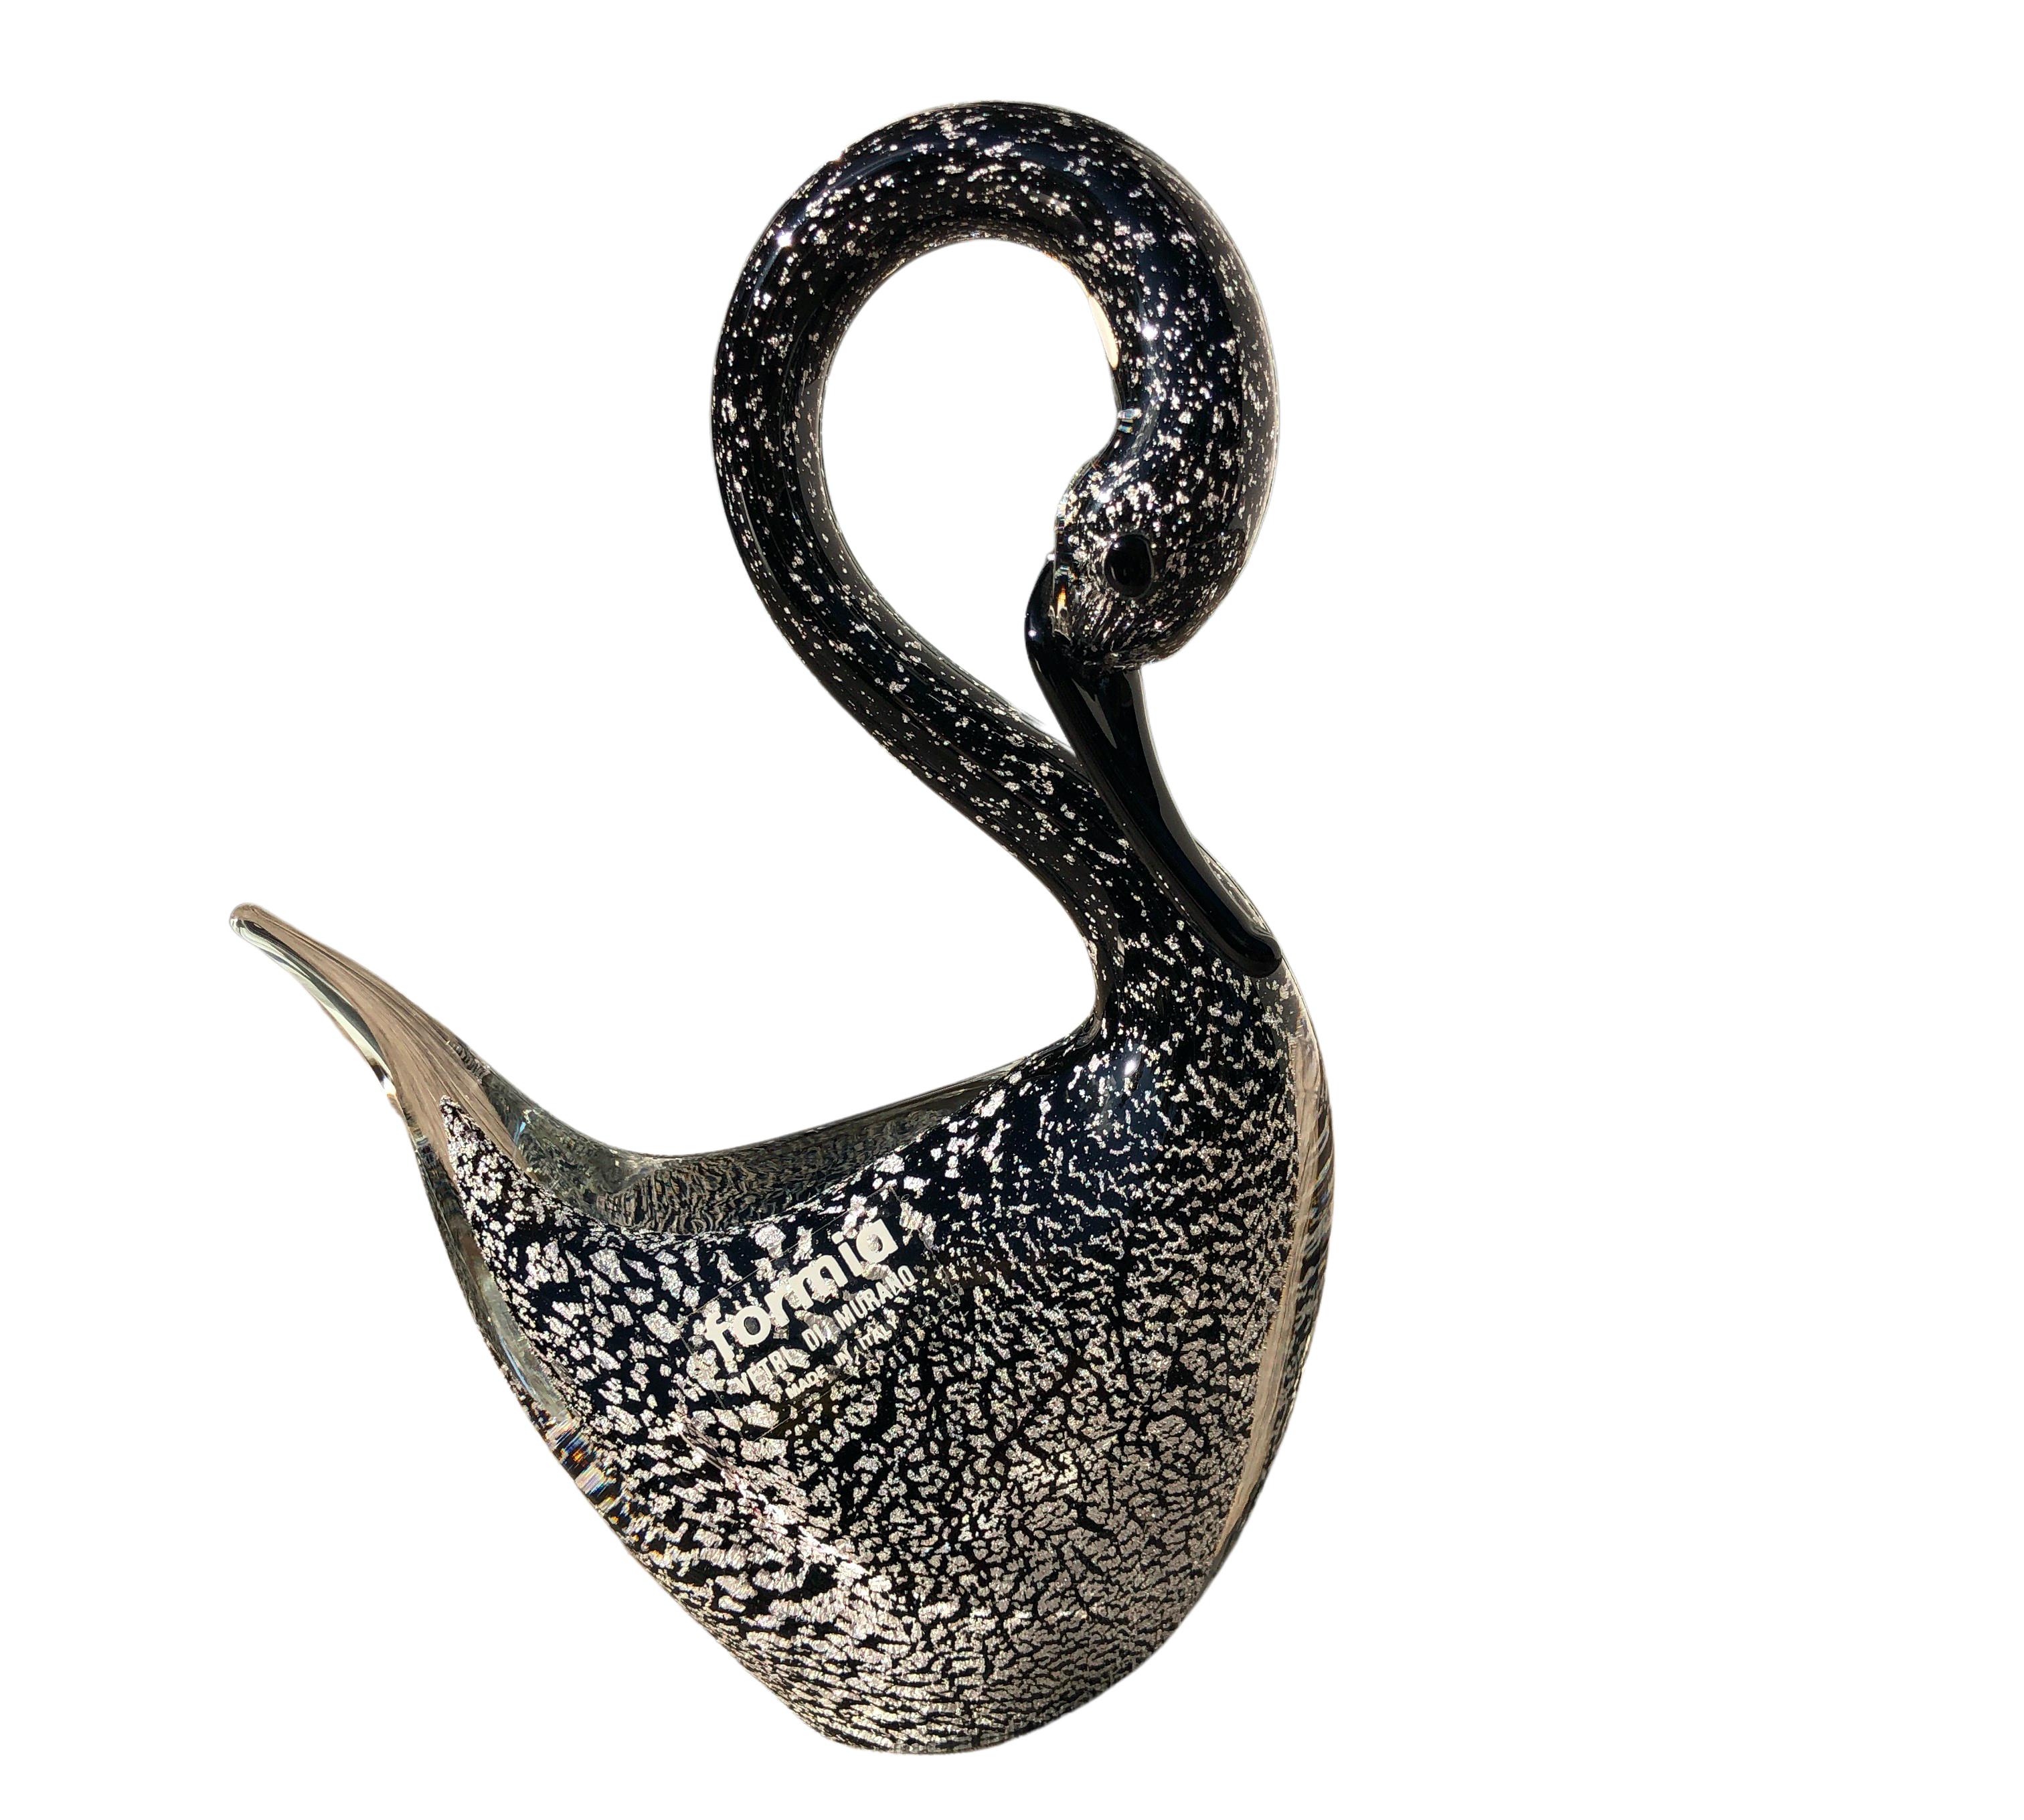 This gorgeous Murano glass swan figurine was manufactured by Formia Murano. Core interior solid black with a mass of aventurine silver inclusions is highly decorative. Exellent condicion. Lovely to use as an sculpture but also as a paperweight.